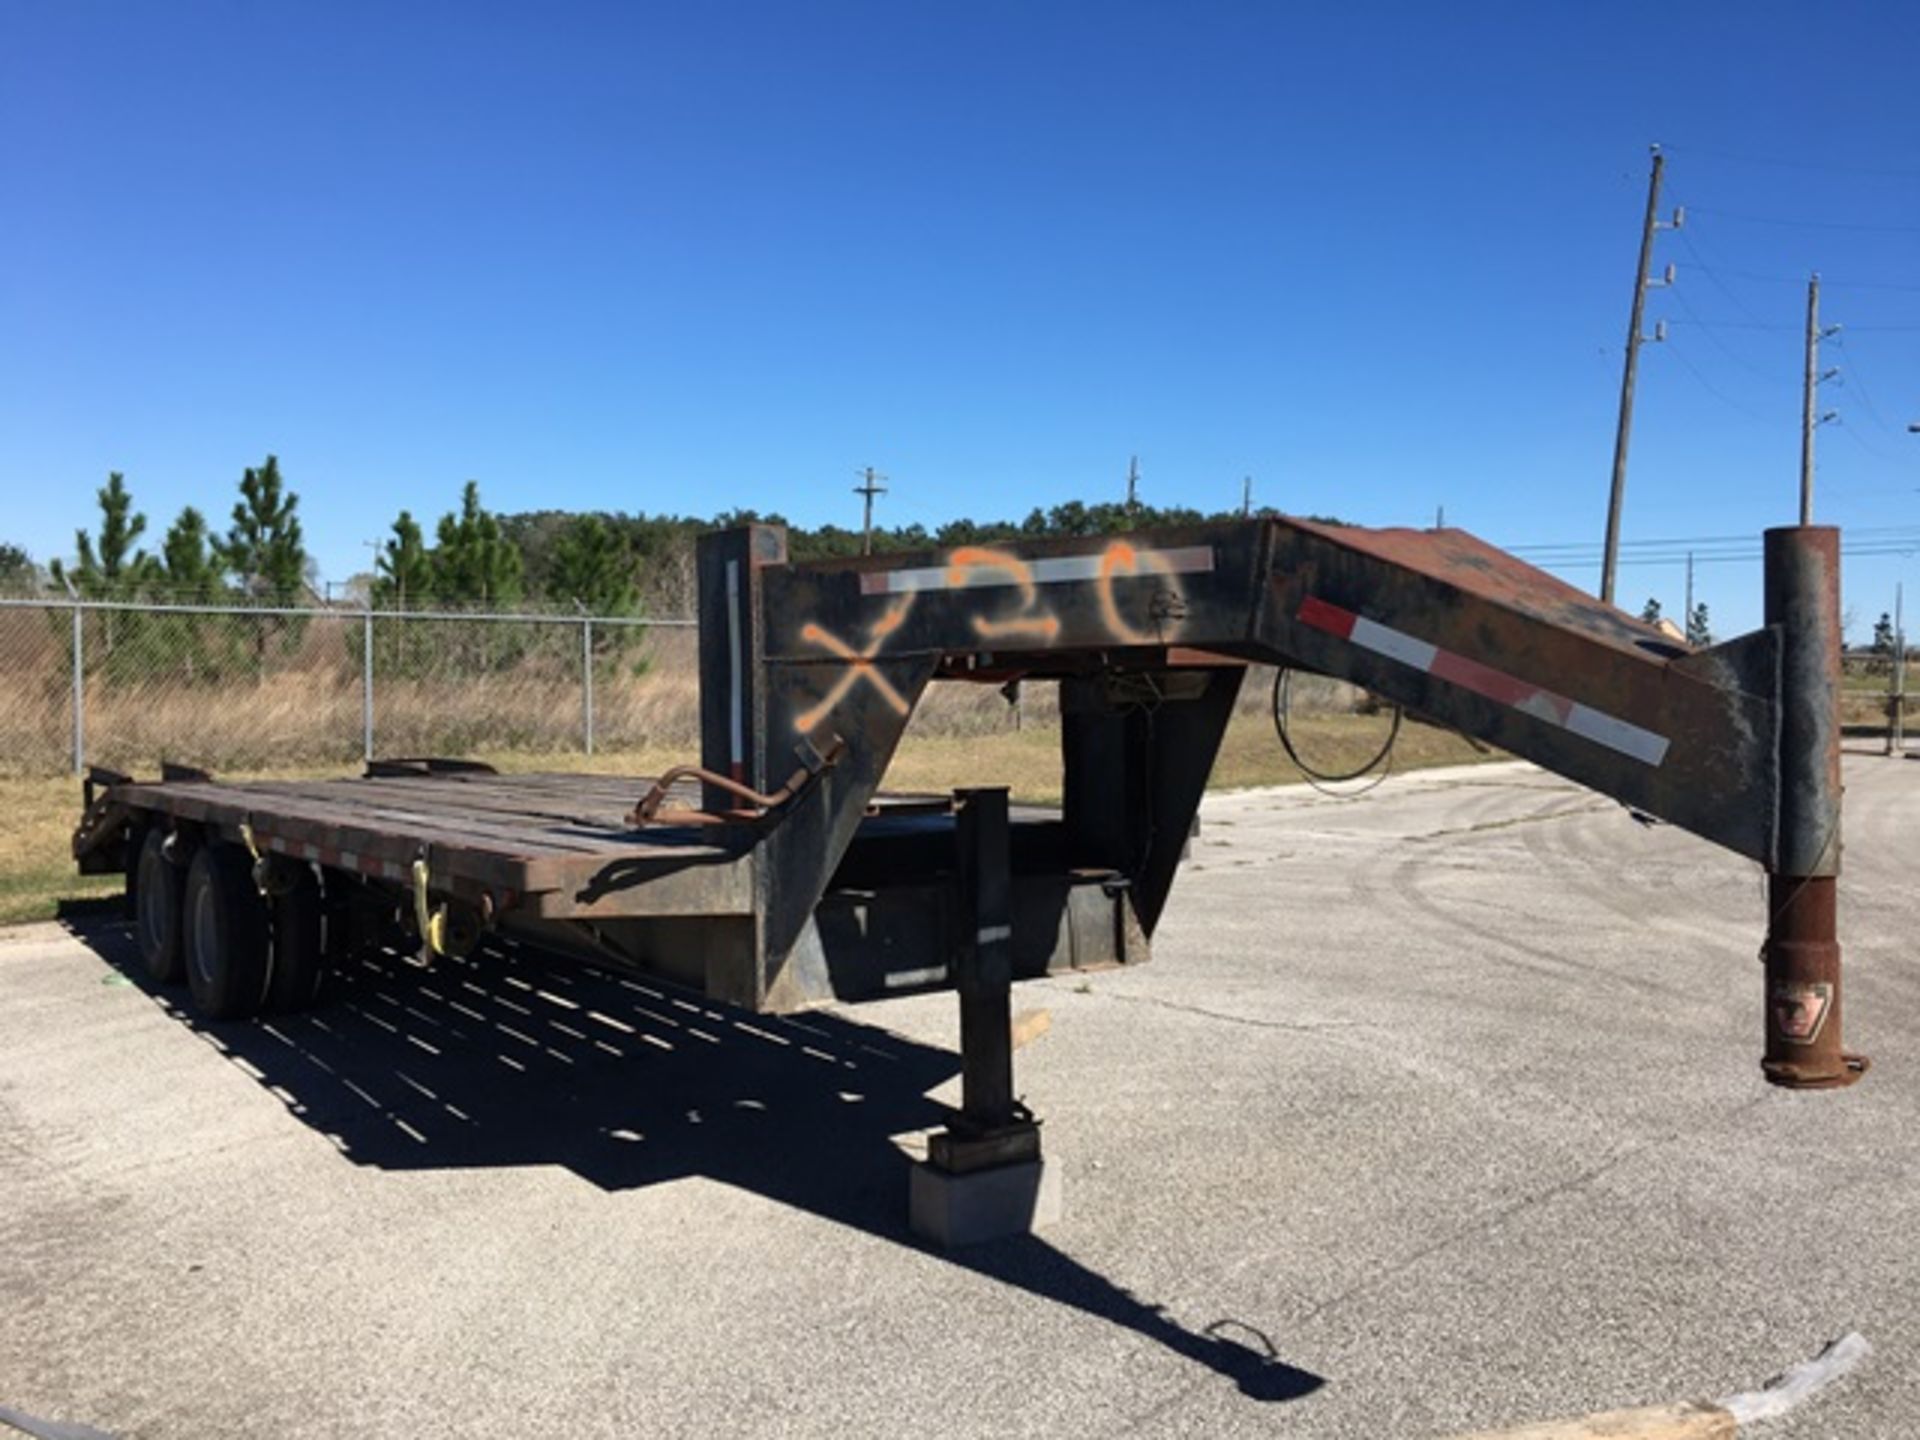 1992 GOOSENECK TRAILER 19' DECK, 5' DOVE TAIL, 5' FOLD UP RAMPS - Image 6 of 6